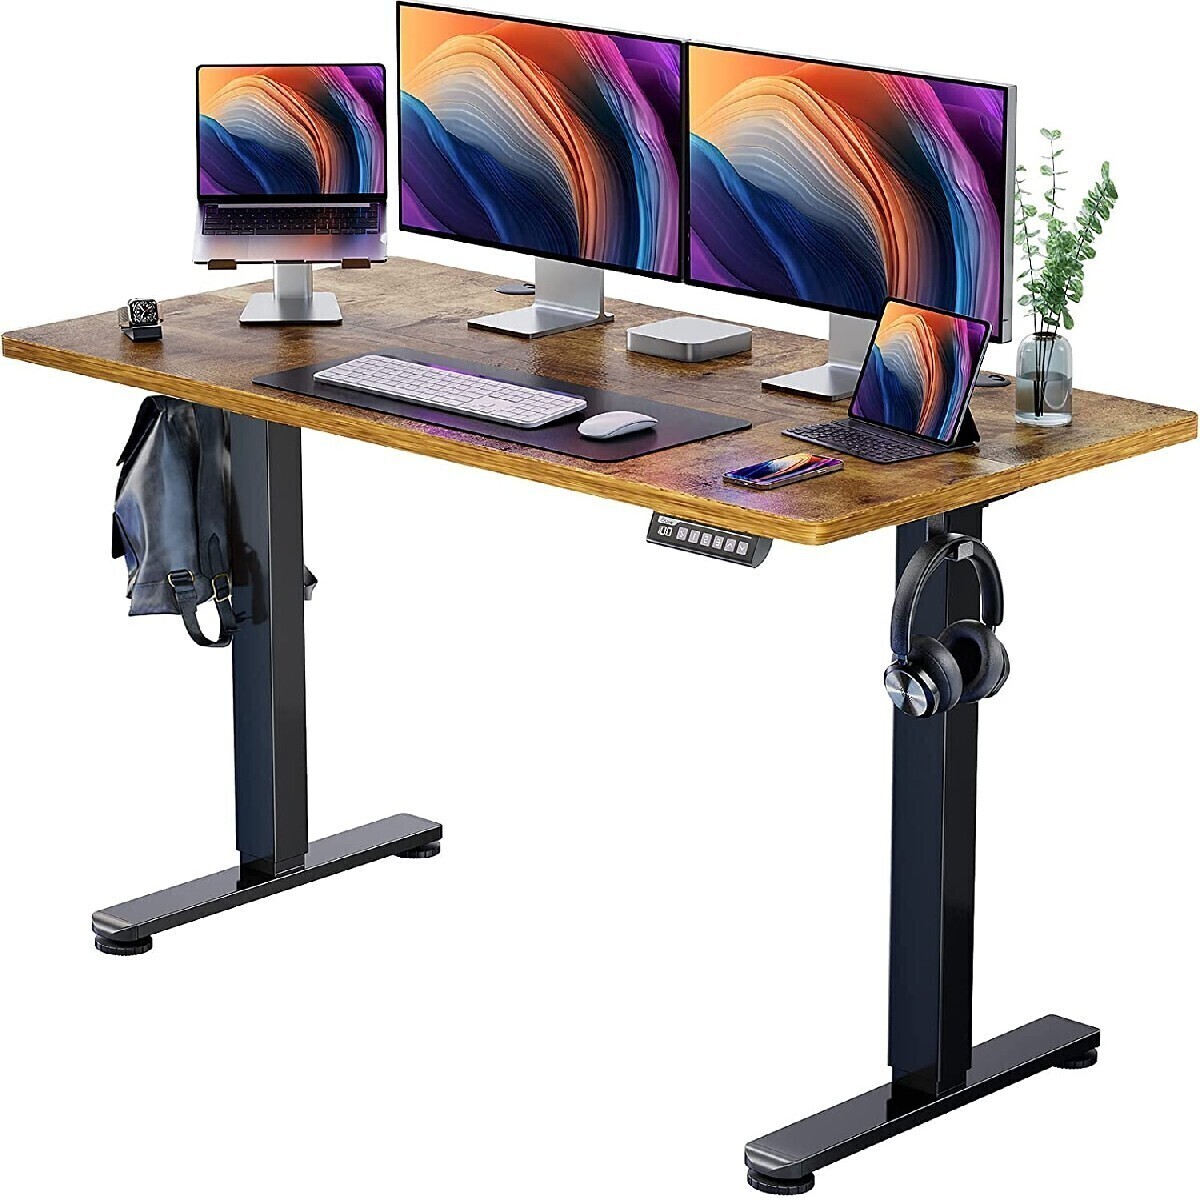 🔥Black Friday Specials💓Height Adjustable Electric Standing Desk😎